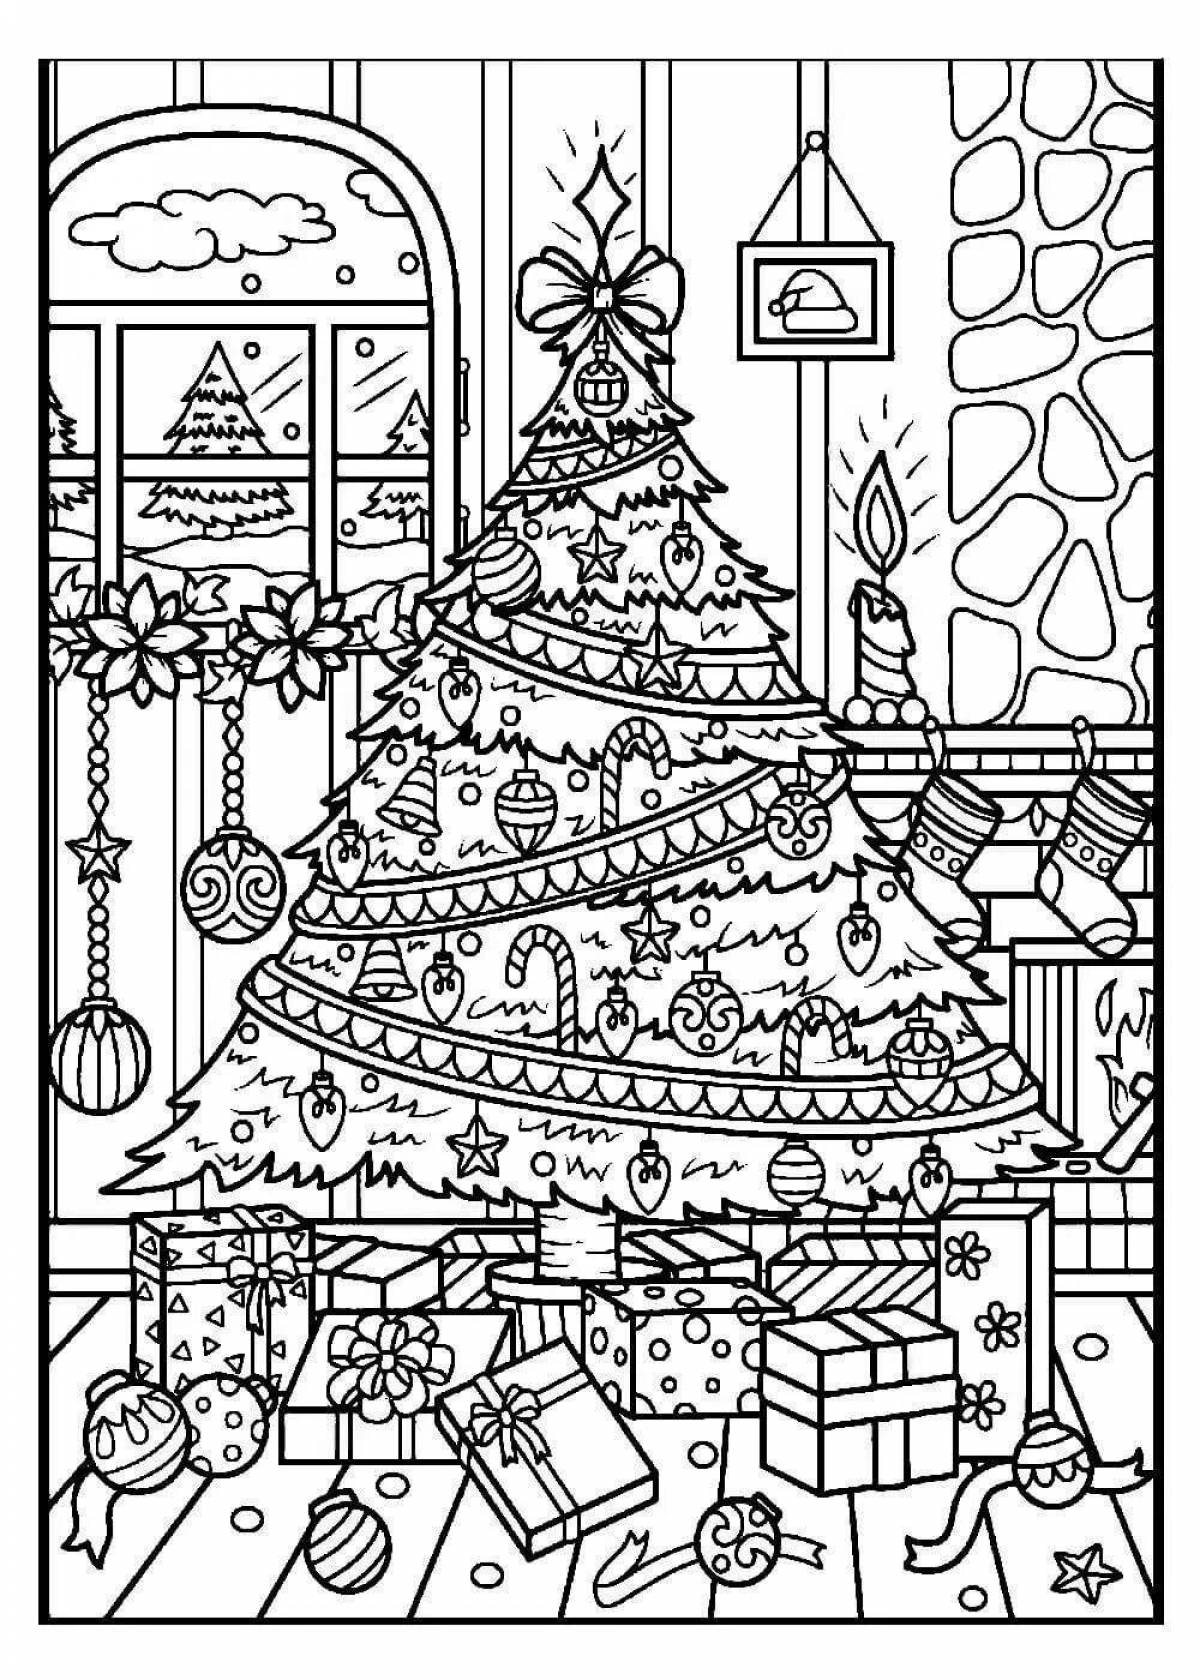 Fabulous big tree coloring page for kids